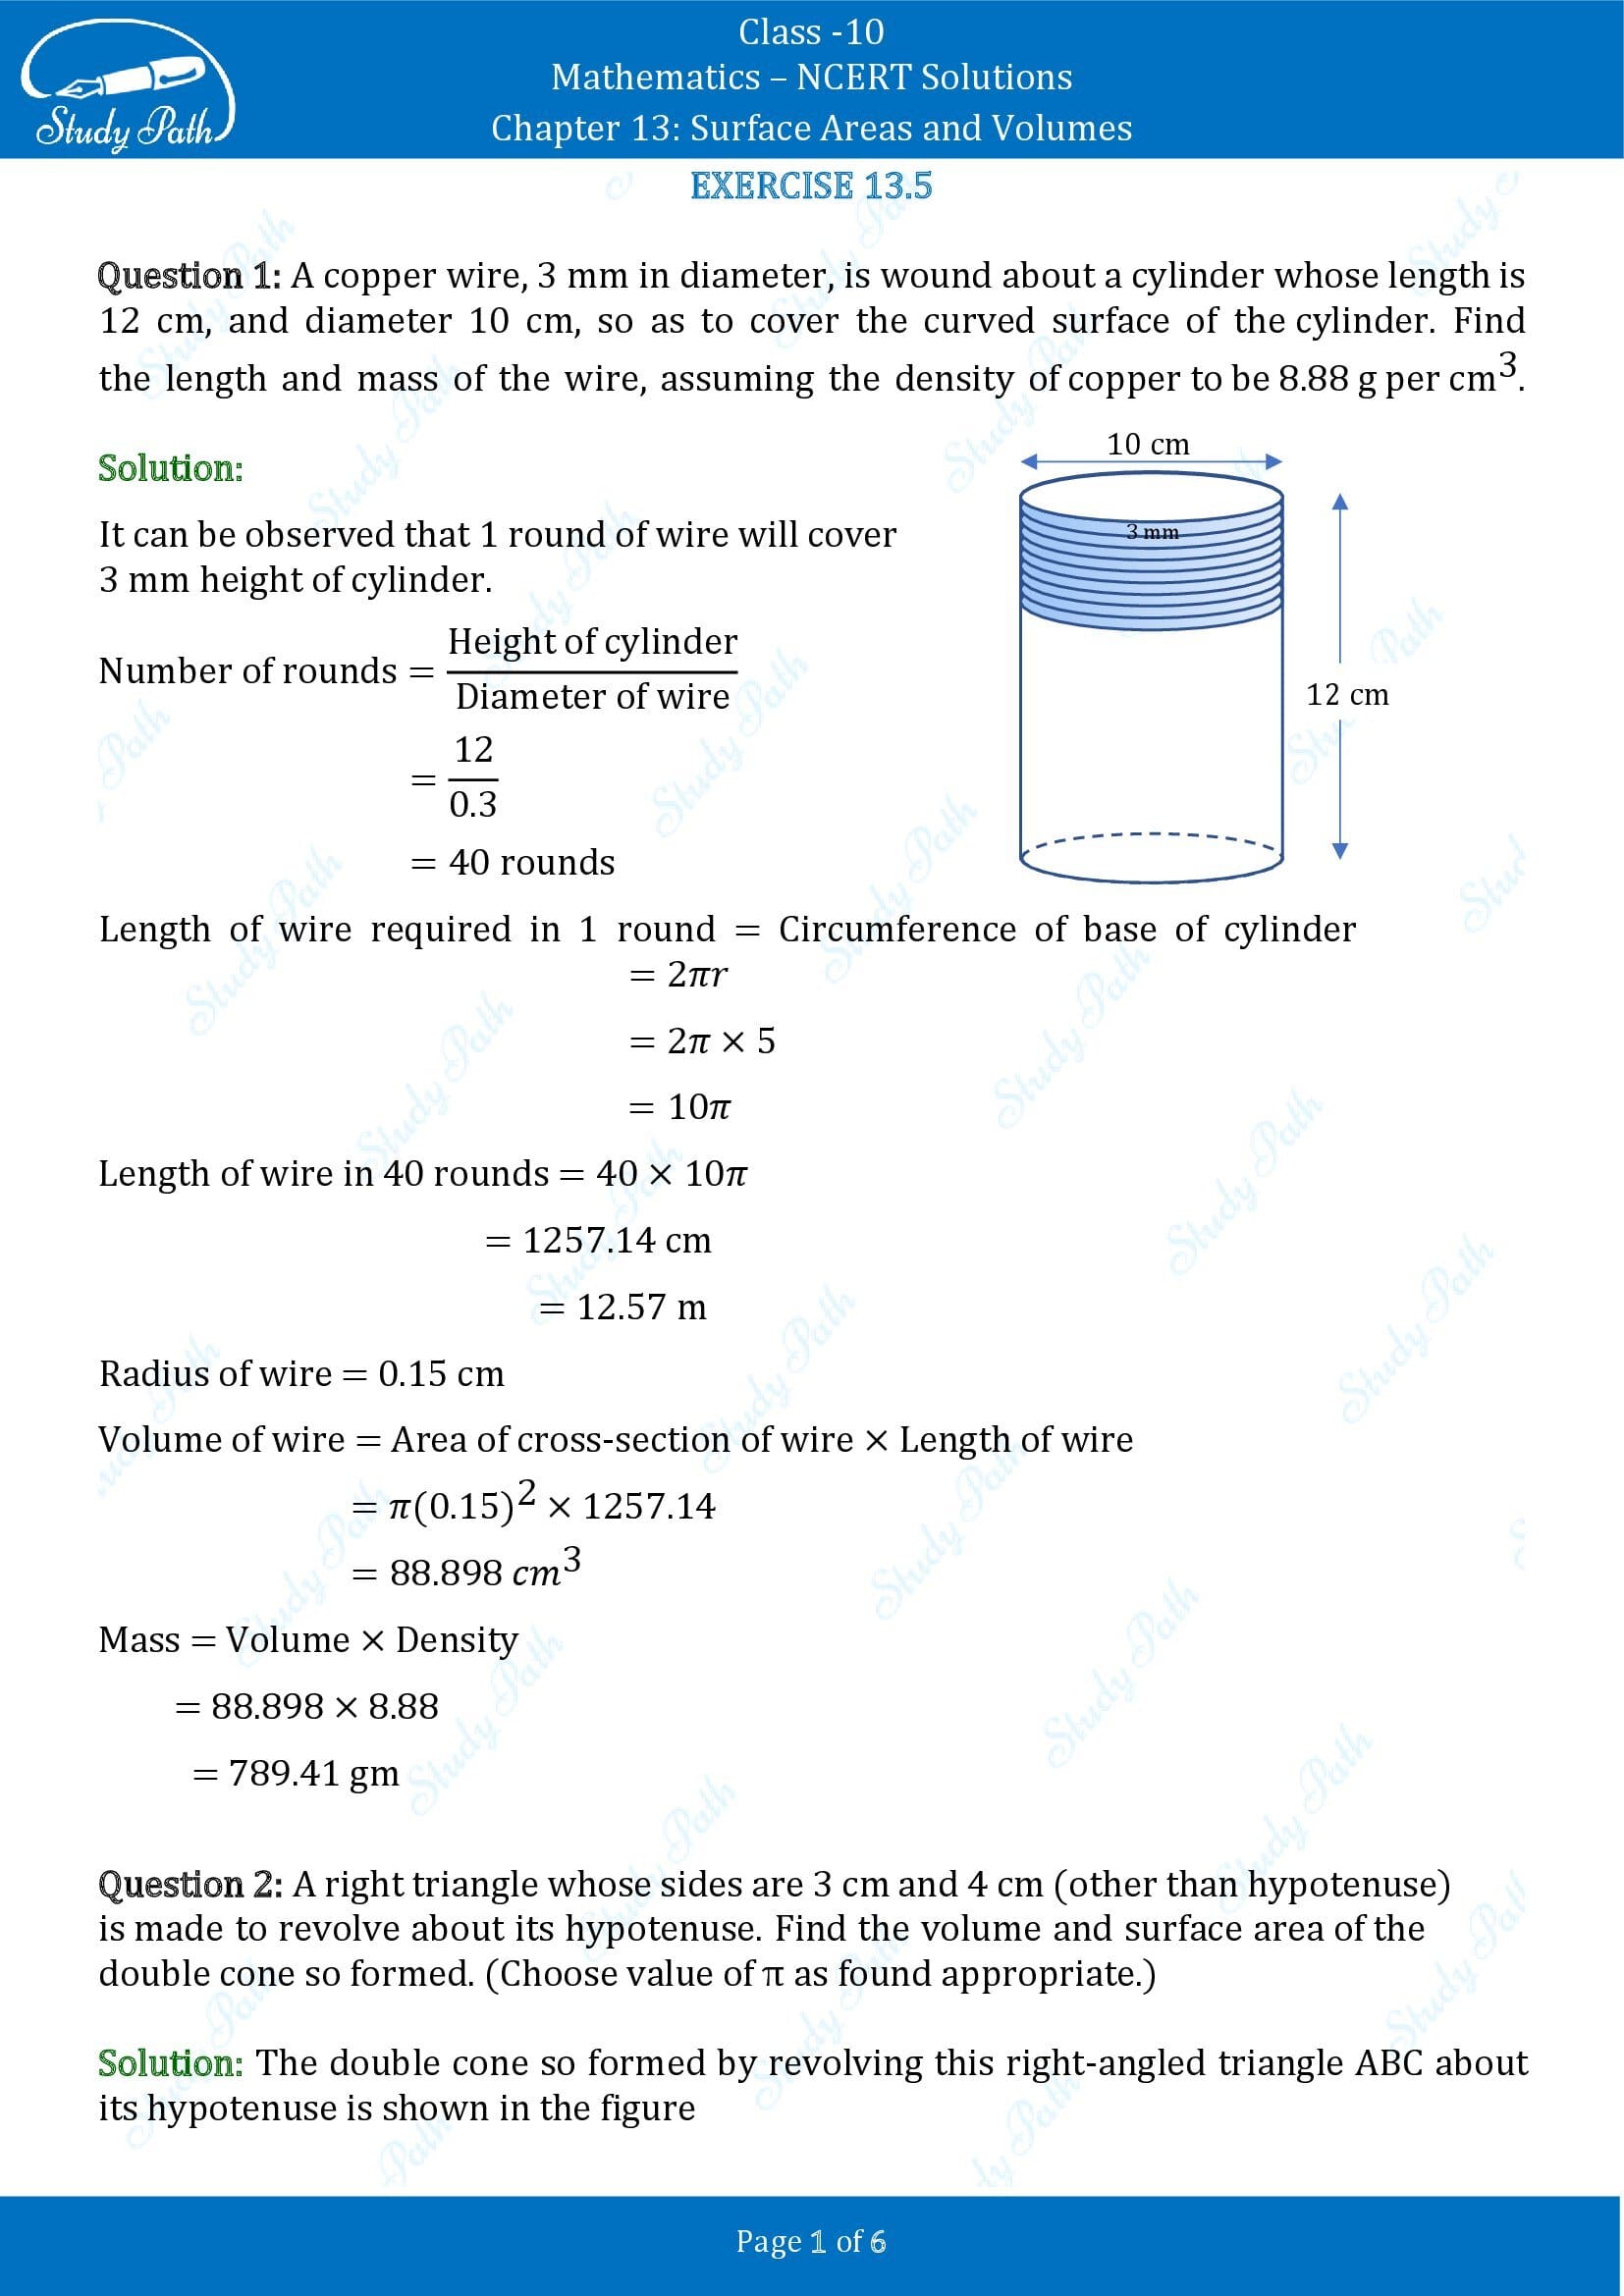 NCERT Solutions for Class 10 Maths Chapter 13 Surface Areas and Volumes Exercise 13.5 00001